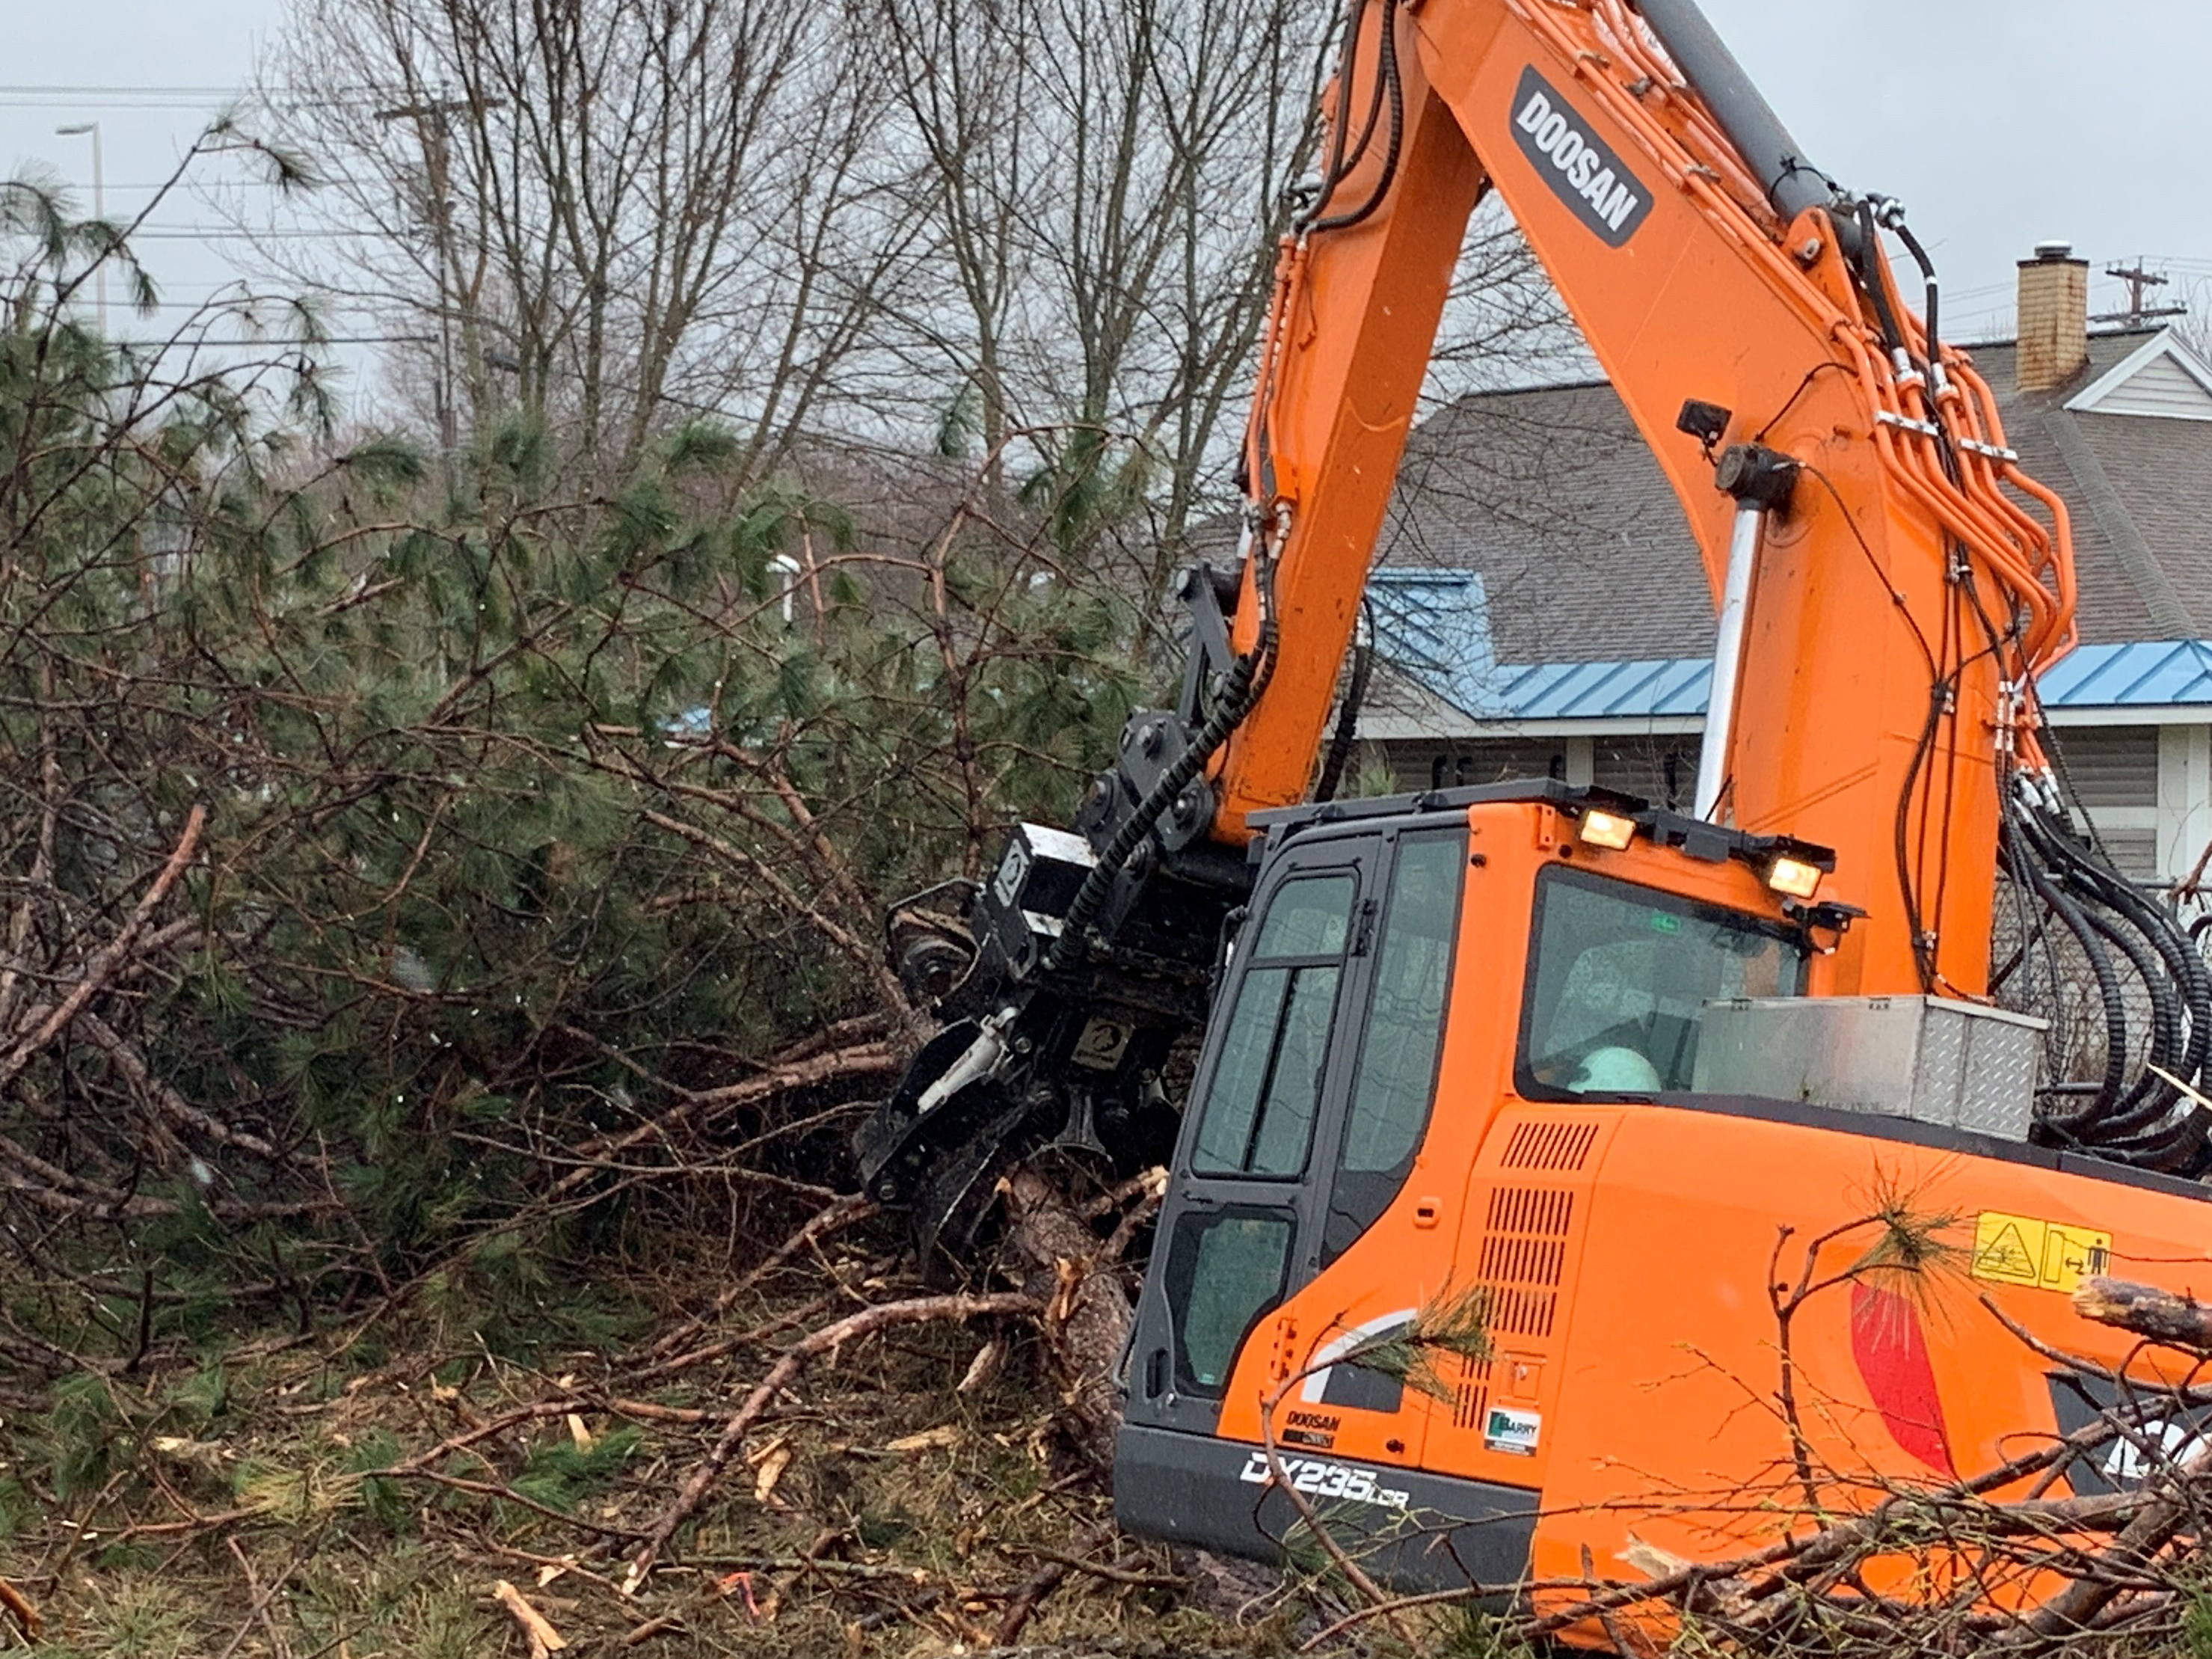 Backhoe clearing debris from project site